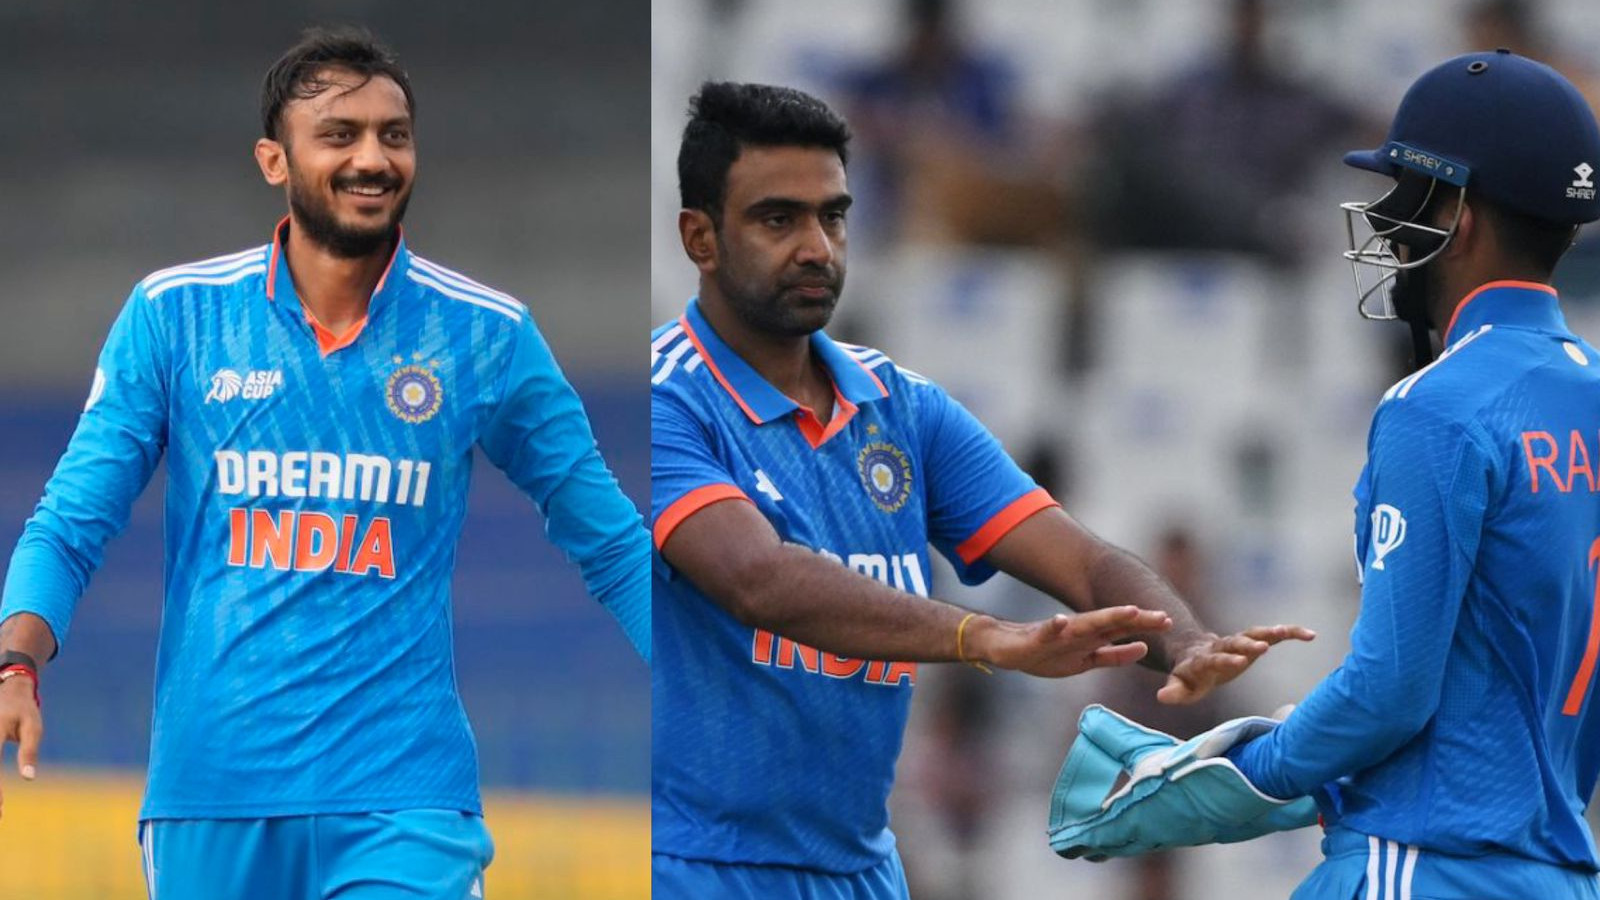 CWC 2023: Akshar Patel ruled out; R Ashwin named replacement as India confirm World Cup squad